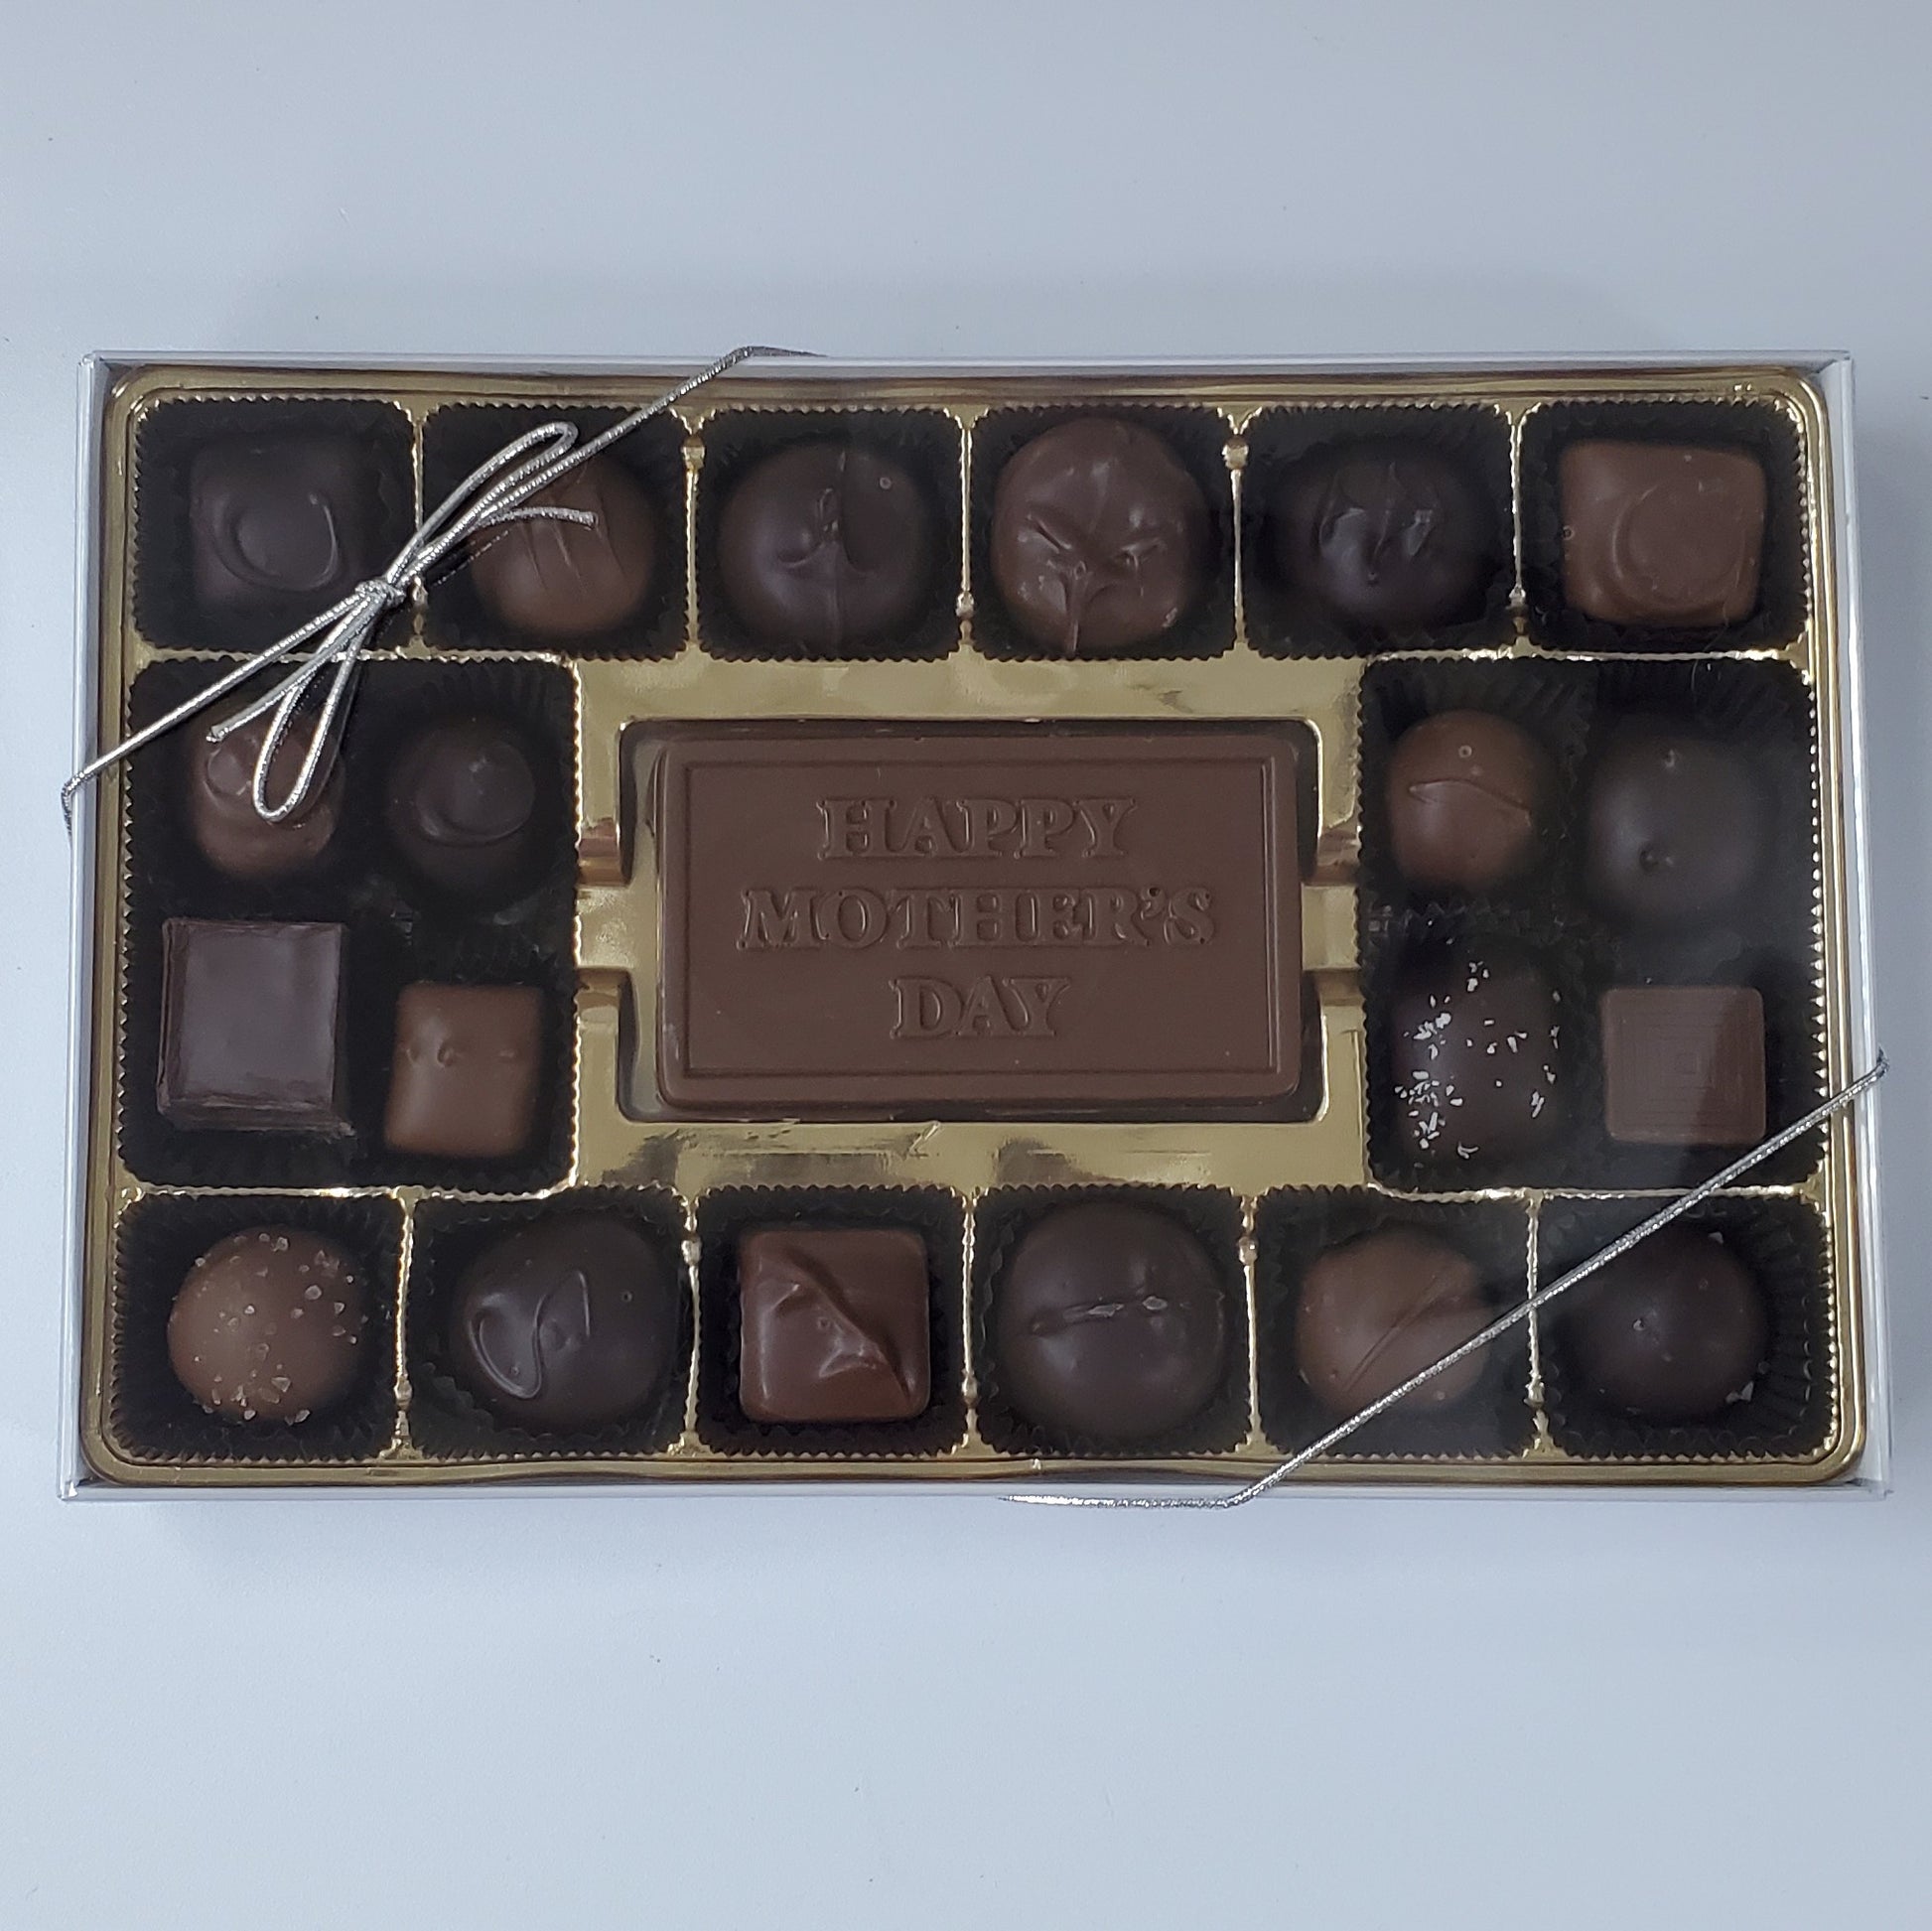 20 Assorted of our Most Popular Hand Made Chocolates in a Decorative Box  with 'Happy Mother's Day' Chocolate Greeting Card